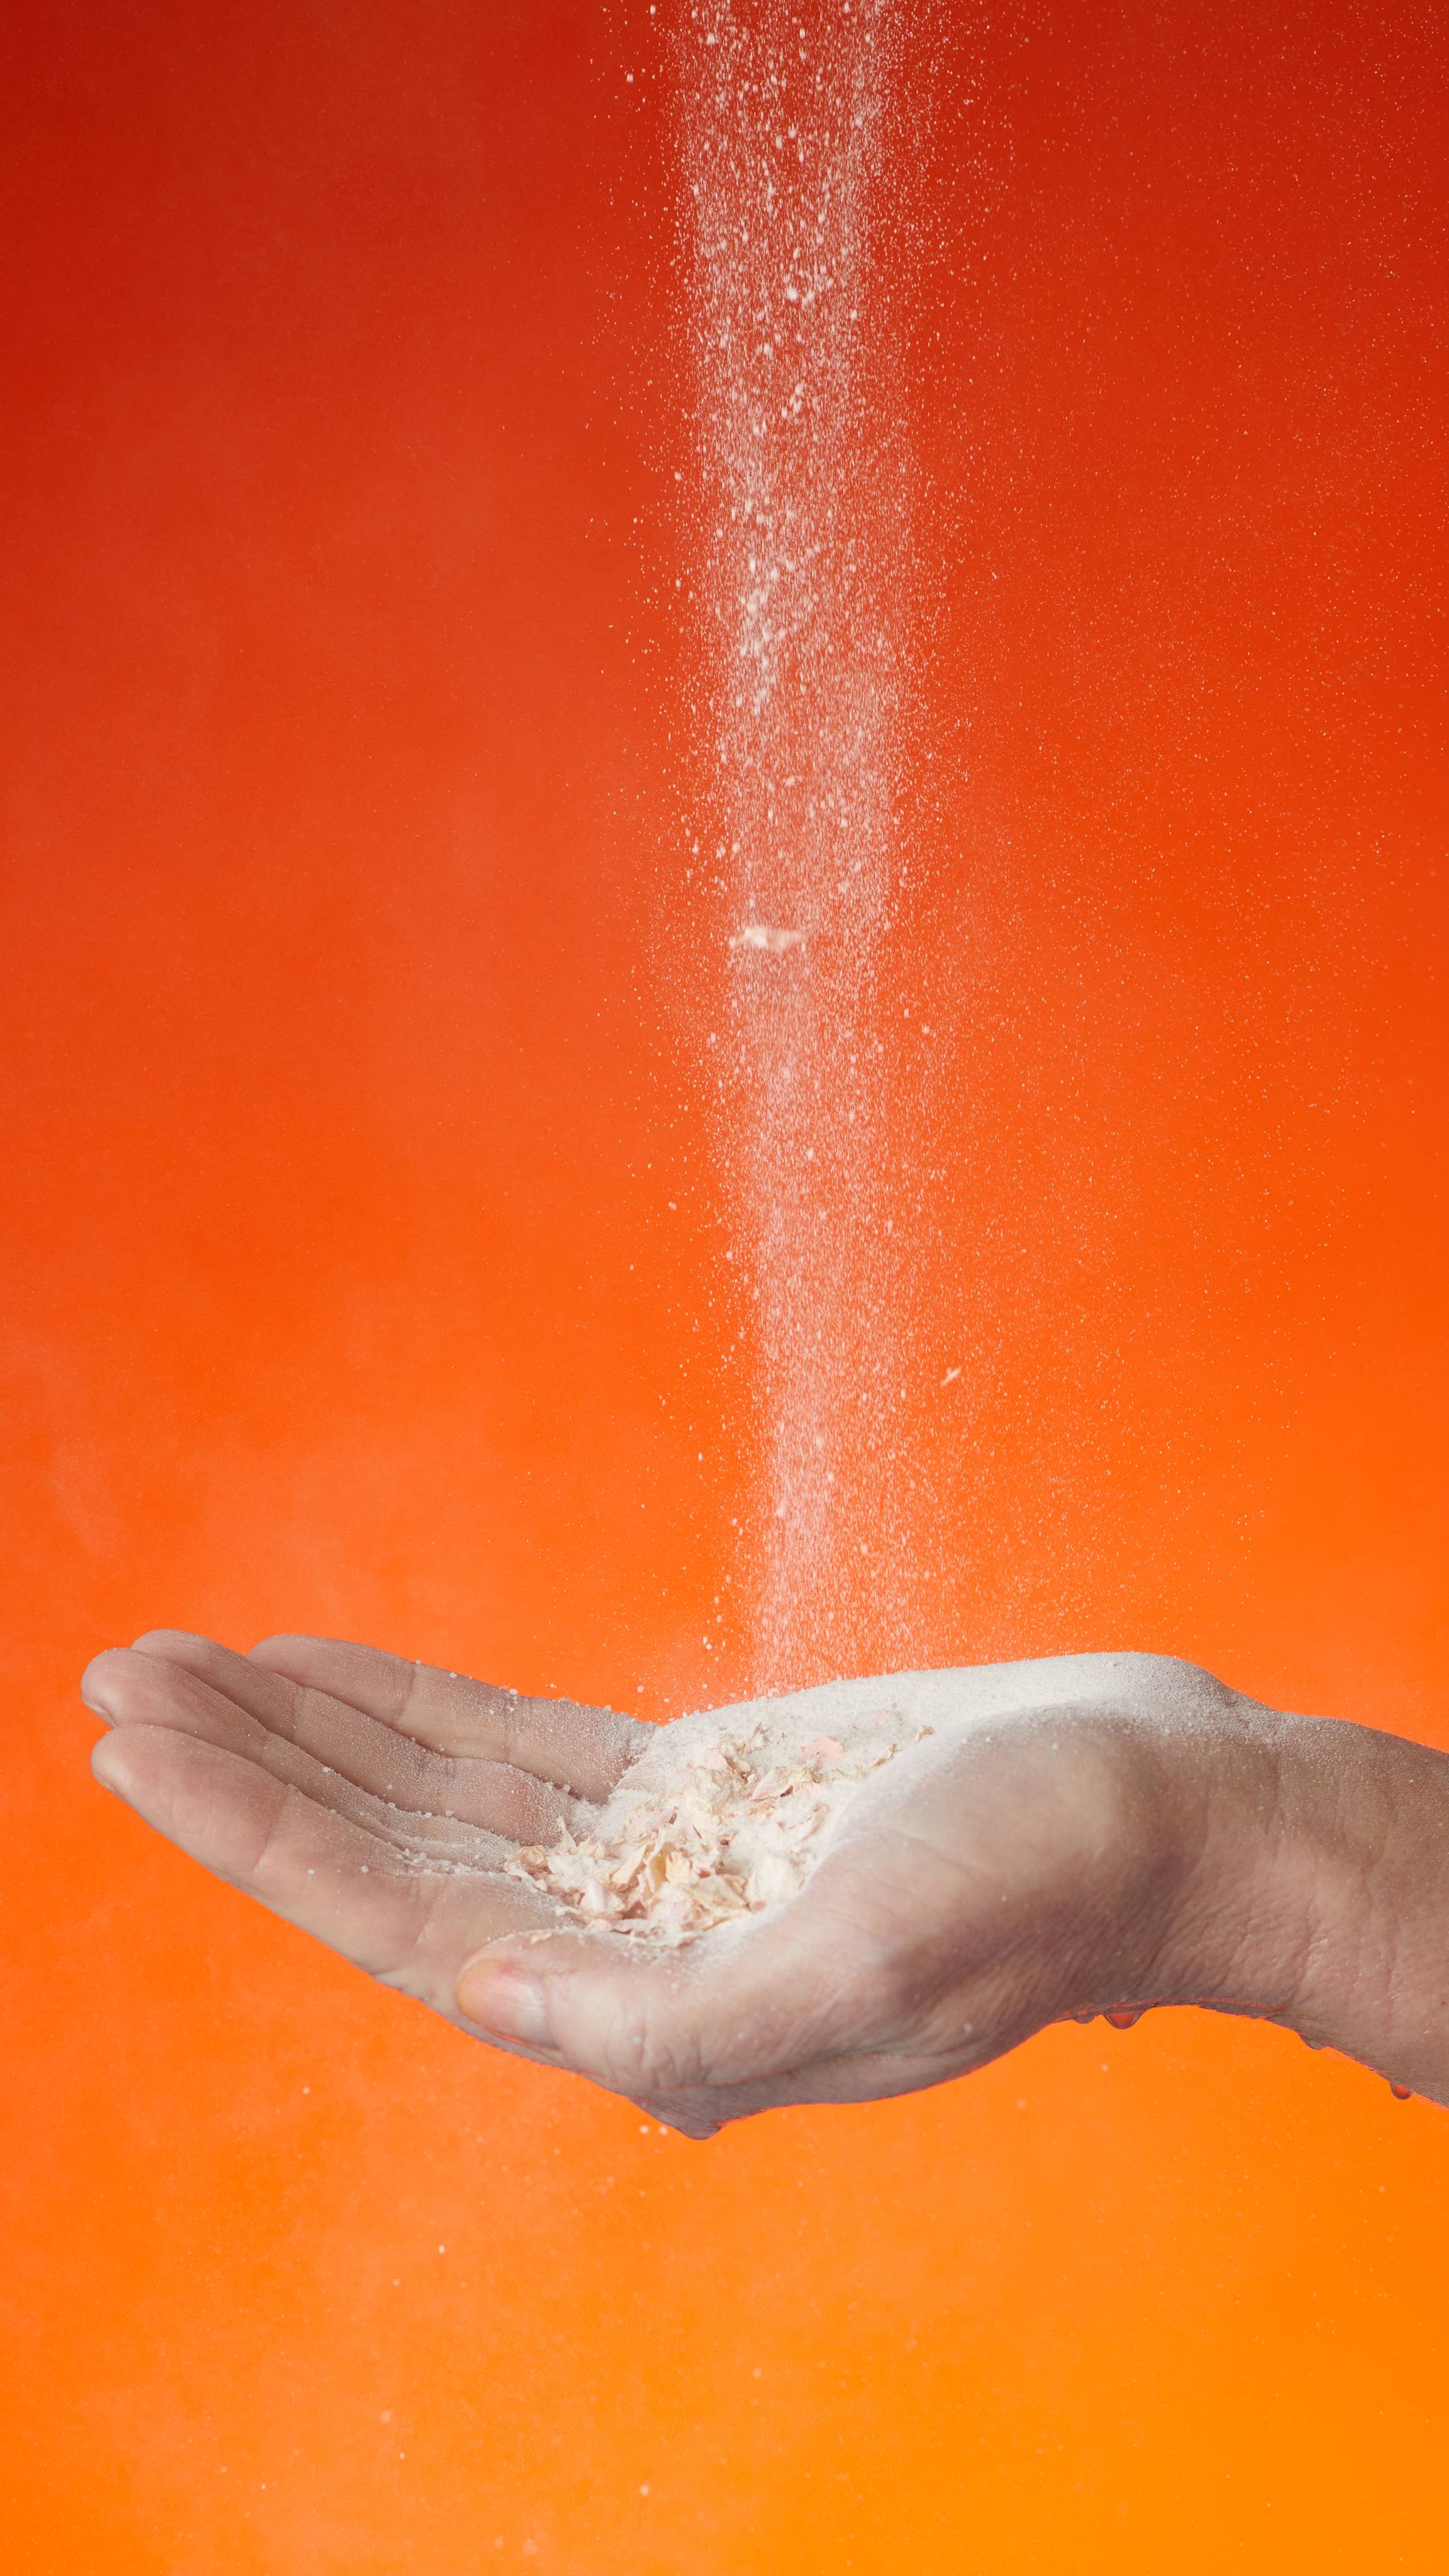 A hand holds the Showder as it is sprinkled. On a dark to light orange gradient background. 